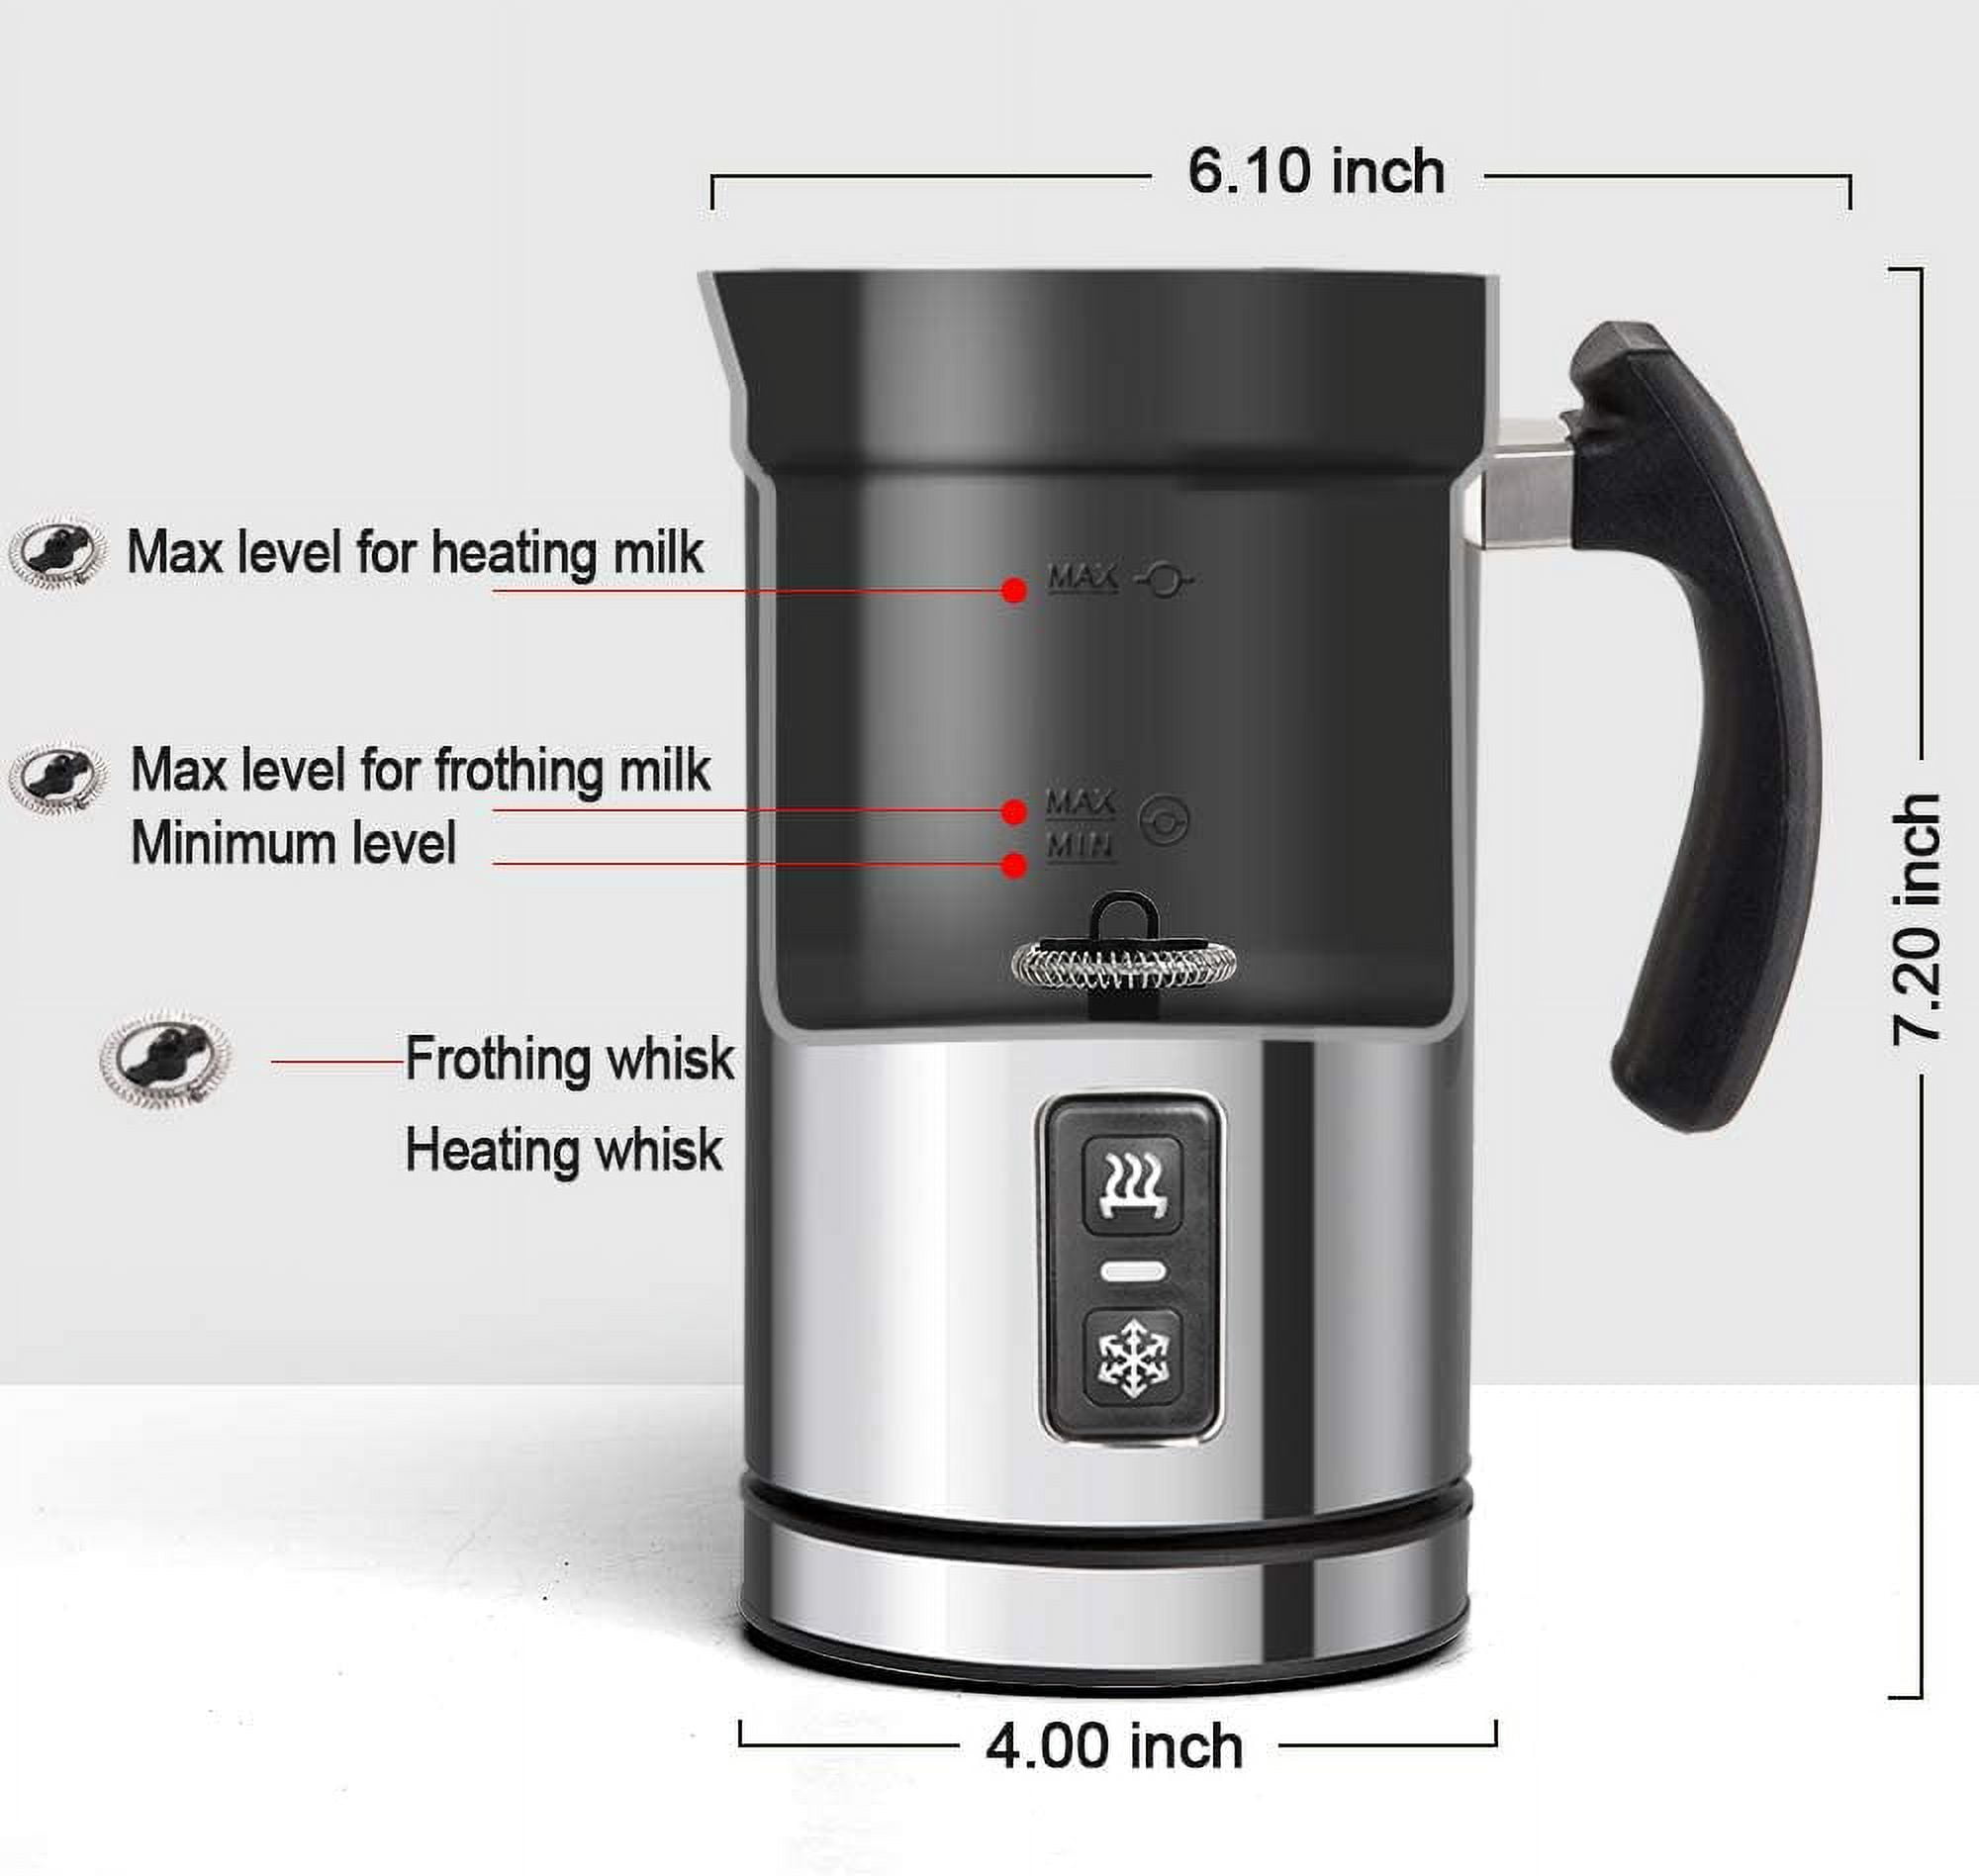 Secura Automatic Milk Frother, 4-in-1 Electric Milk Steamer, 17oz  Detachable Hot/Cold Foam Maker, Milk Warmer for Latte, Cappuccinos,  Macchiato, Hot Chocolate, with Silicone Spatula & 2 Whisks 